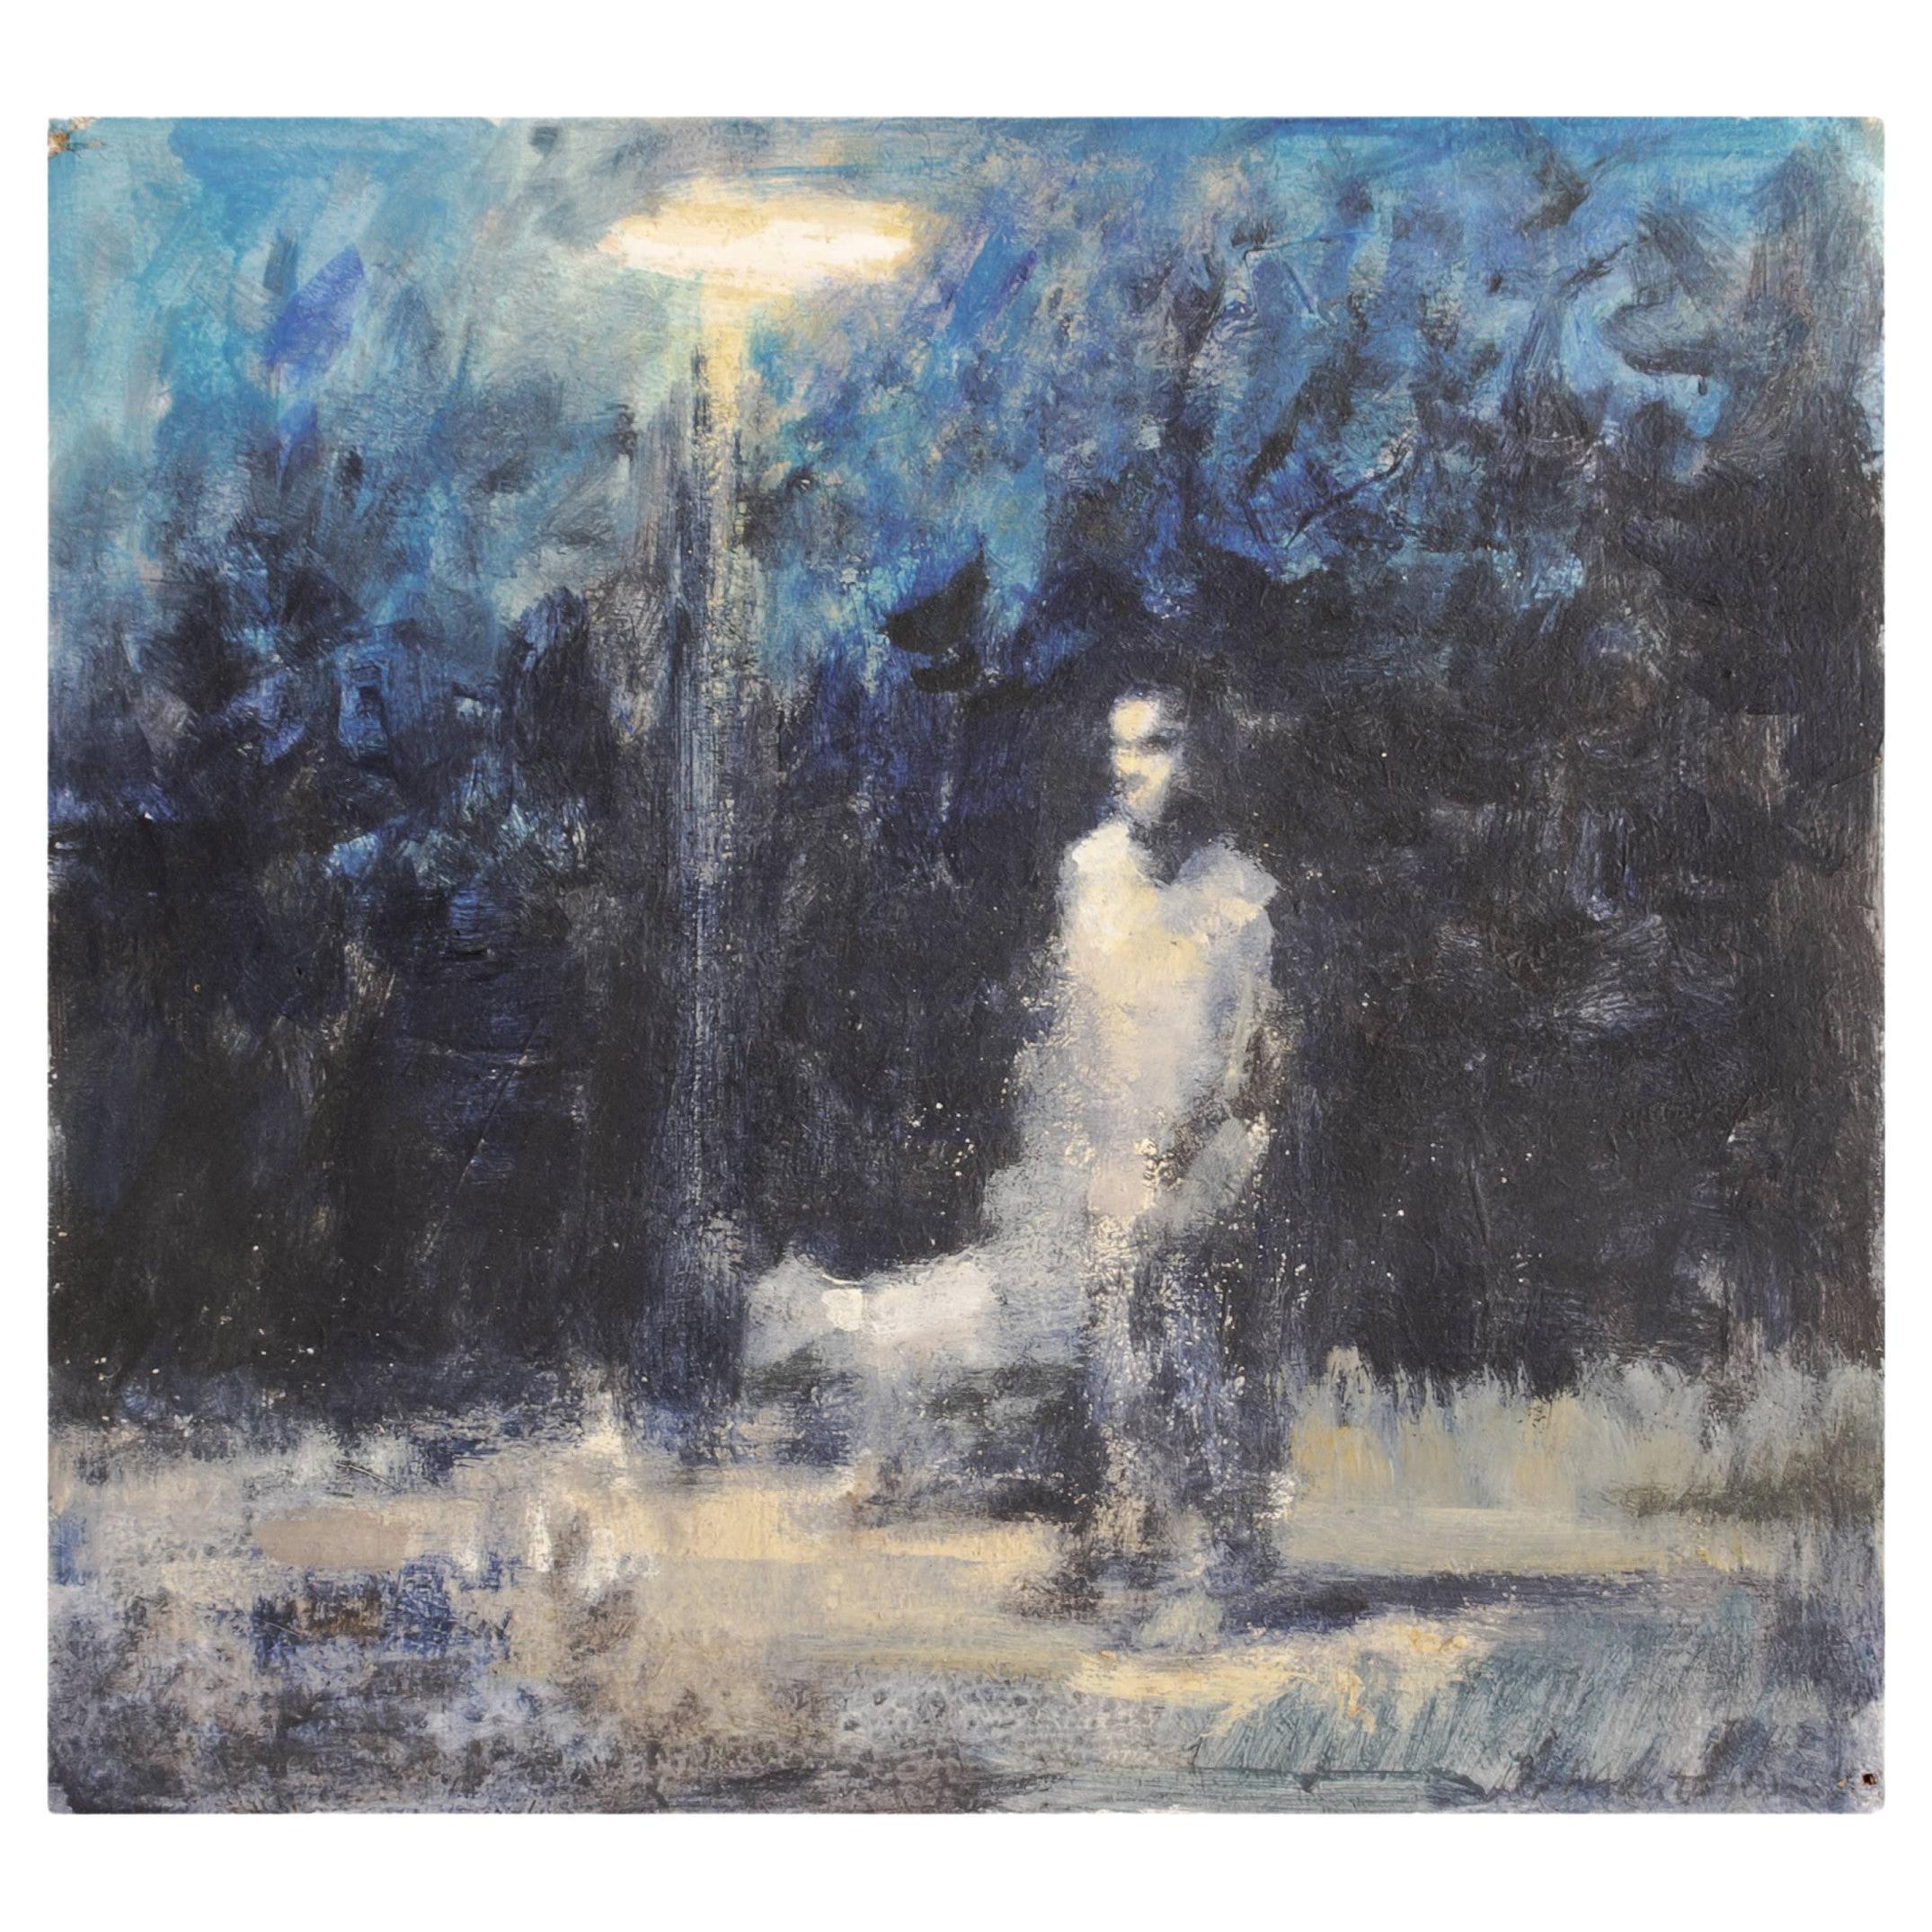 Peter Martensen Oil Painting on Wood "Man with Dog in the Light of Street Lamp" For Sale